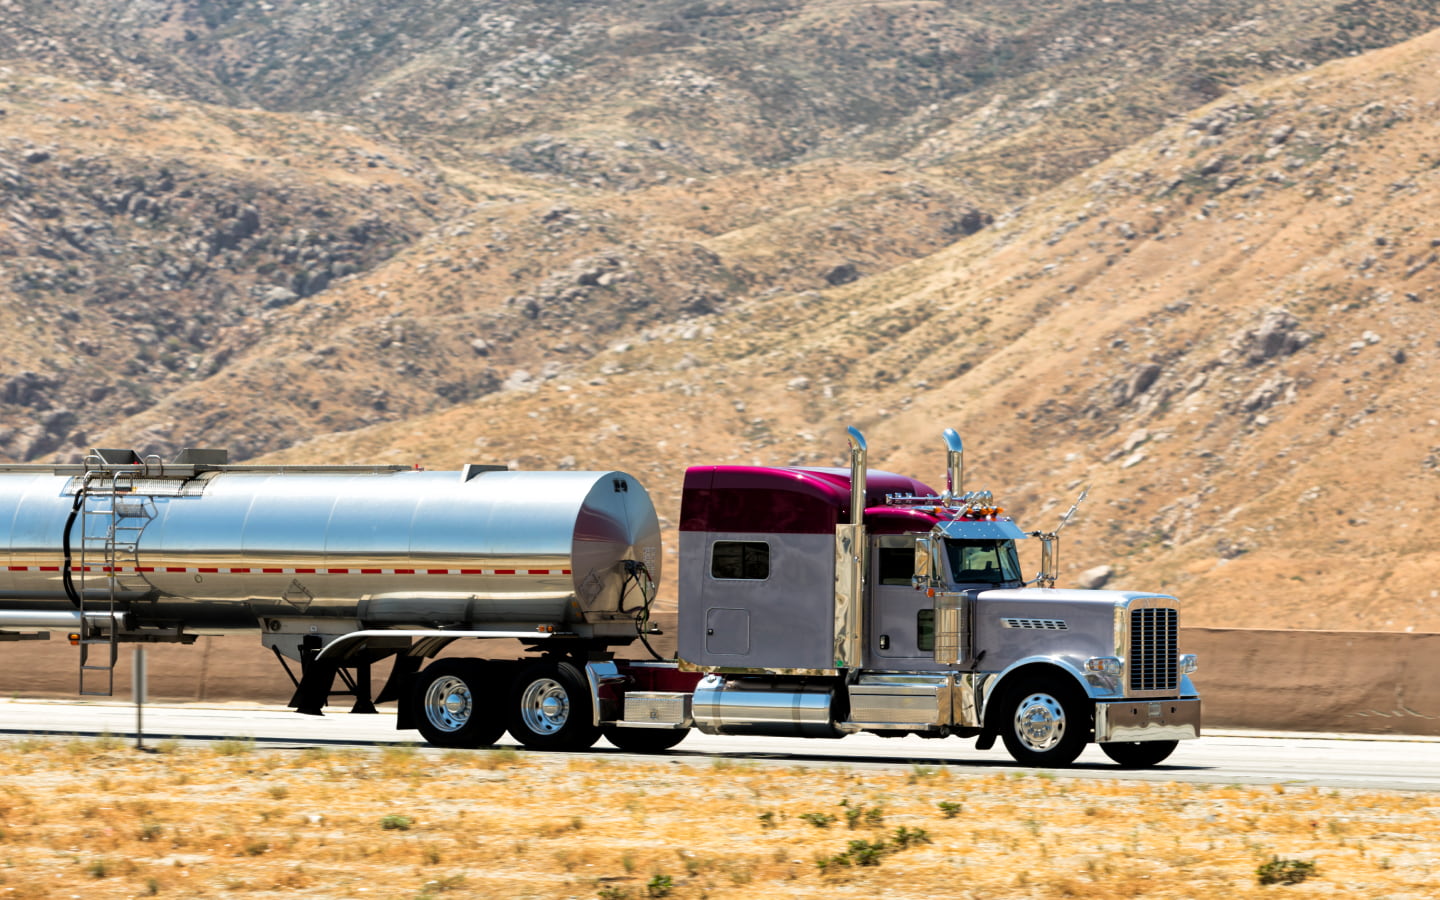 IoT data with artificial intelligence reduces downtime, helps truckers keep  on trucking